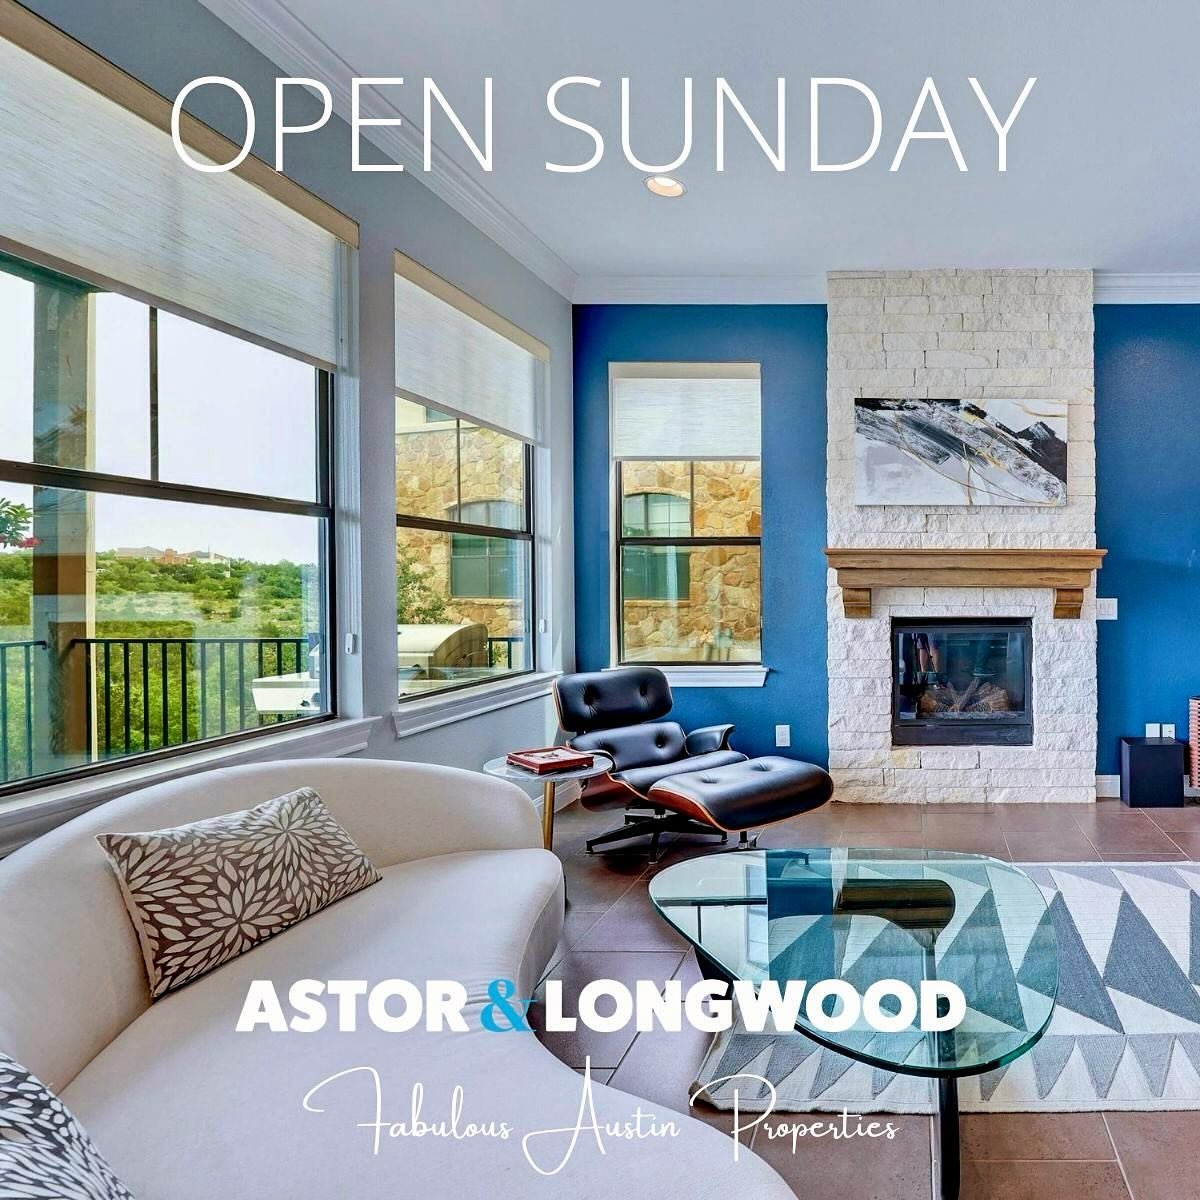 OPEN SUNDAY 1-3PM!  Come see this marvelously located, delightfully spacious and light-filled townhome with spectacular Hill Country vistas from every room. This marvelous residence is move-in ready and offers a number of features that add to a relax